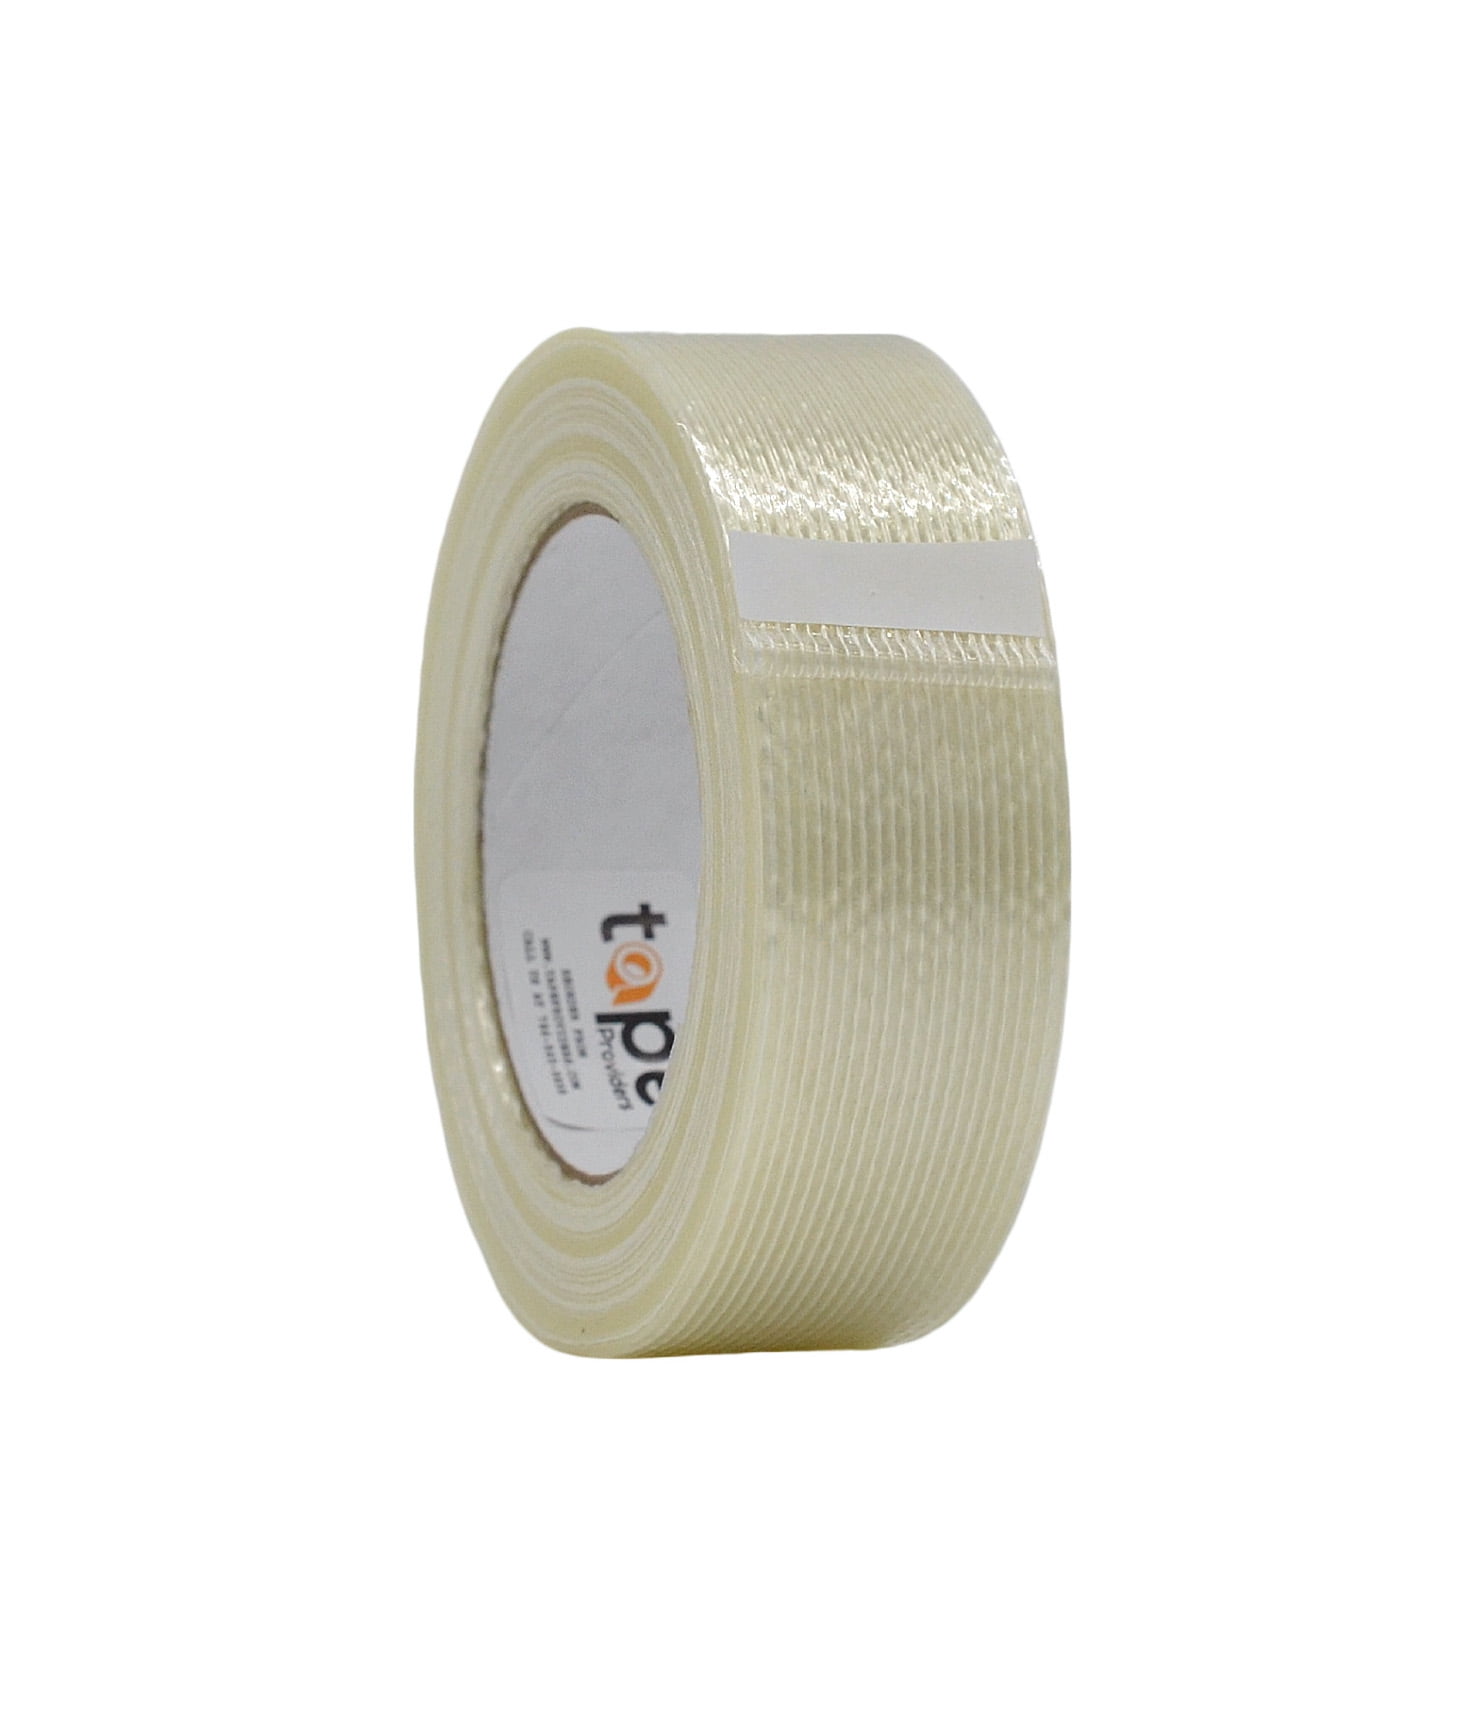 Intertape RG300 Utility Grade Filament Strapping Tape White x 60 yds. 1 in 